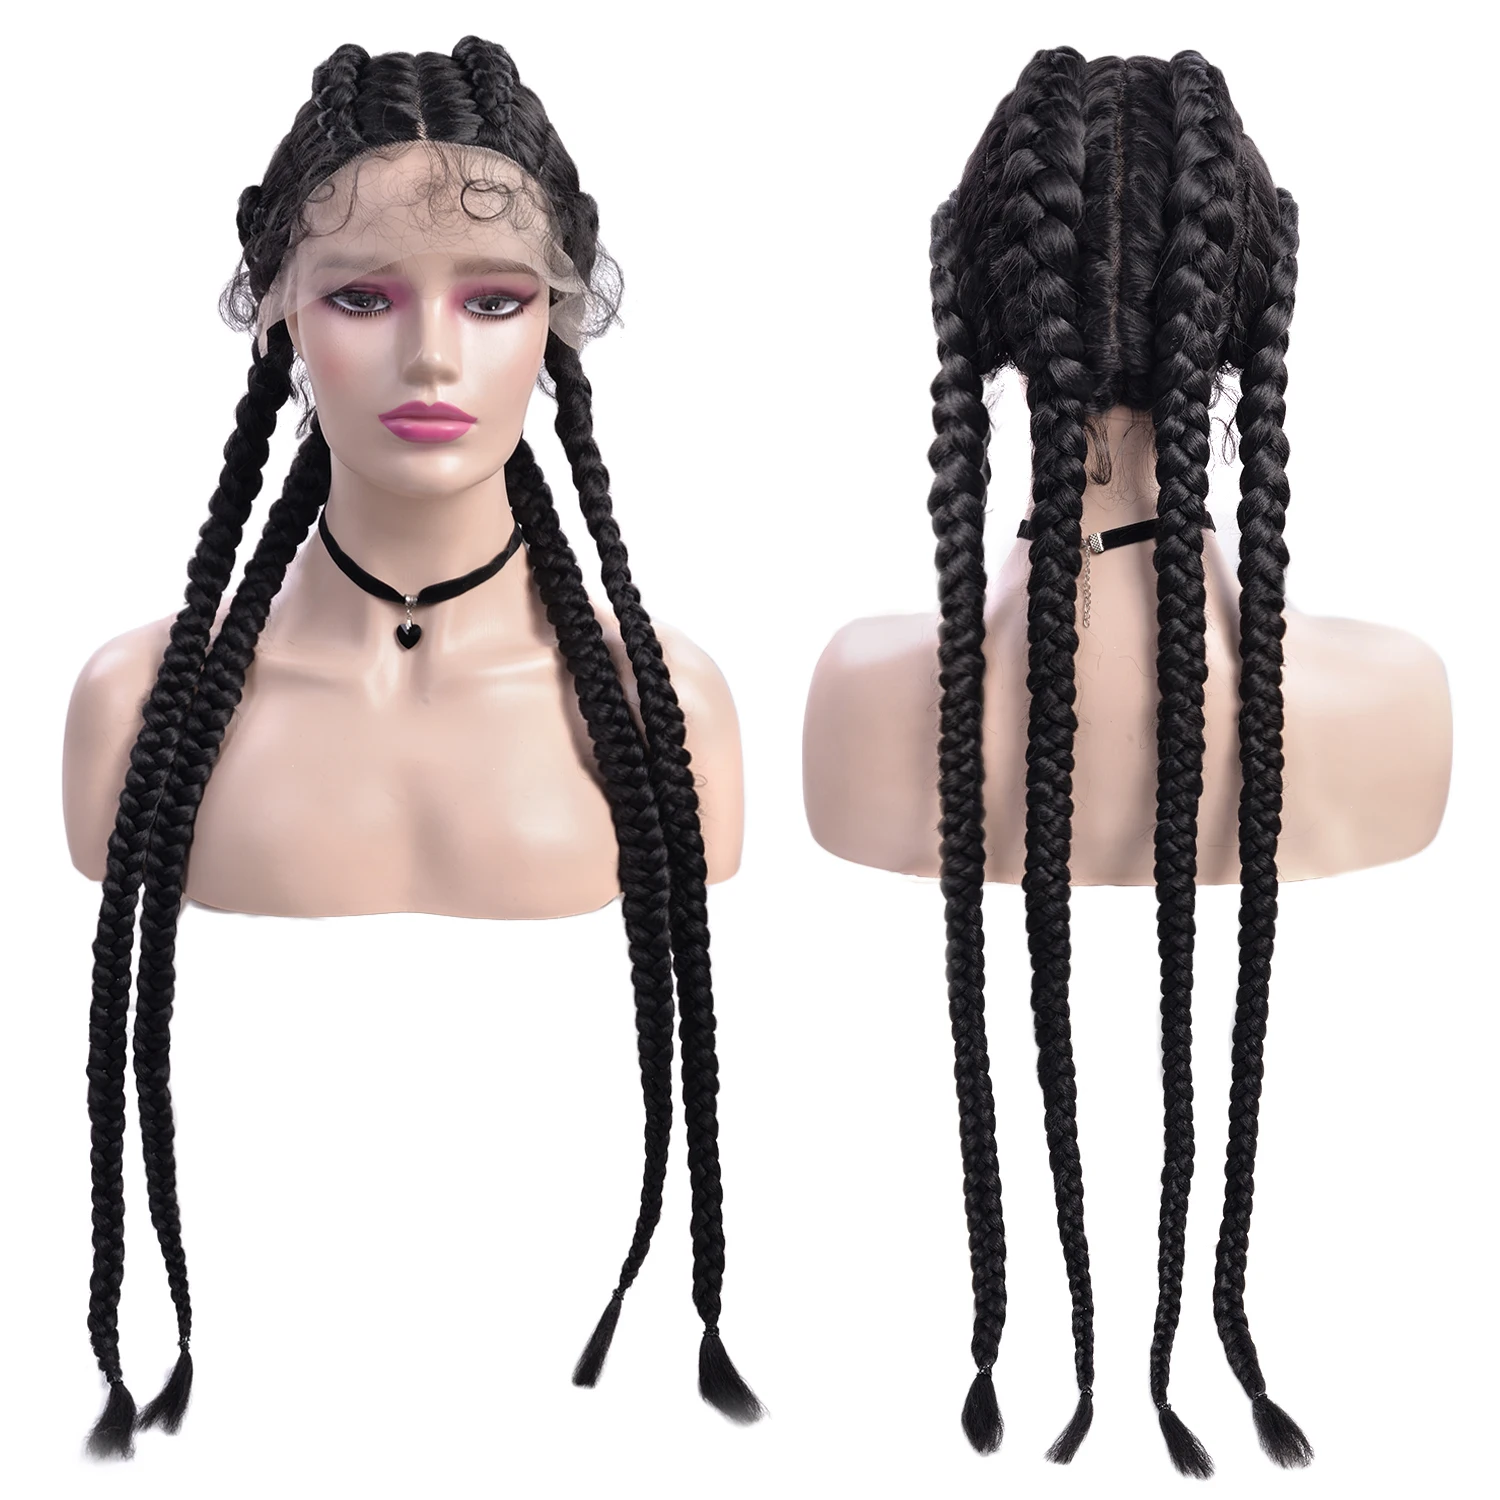 Braided Lace Front Wig African Glueless Box Braids Wig Women Tresse Cornrow Synthetic Lace Braided Wig Baby Hair For Black Women